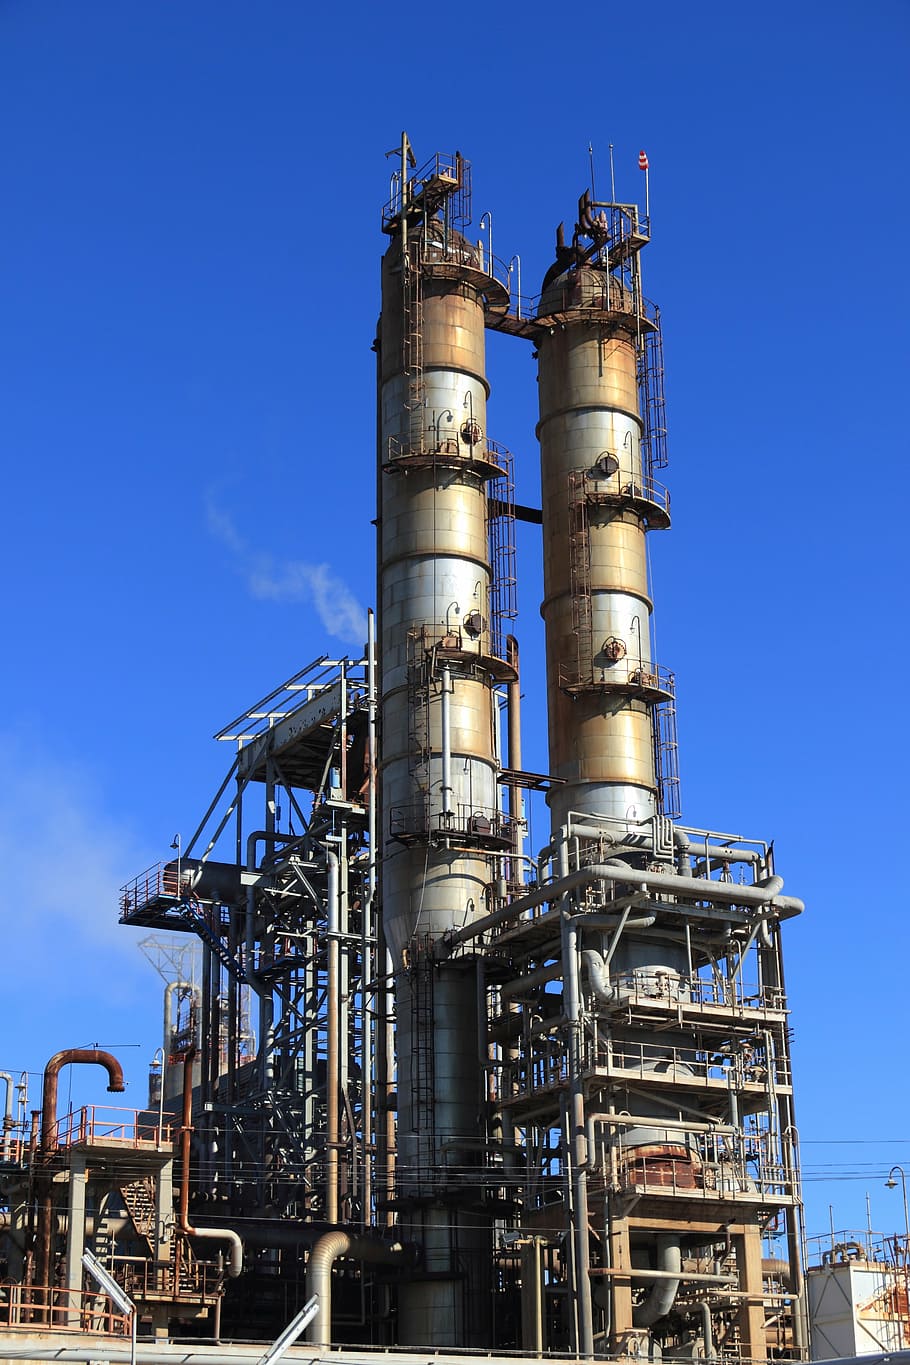 spain, industry, equipment, plant, production, factory, refinery